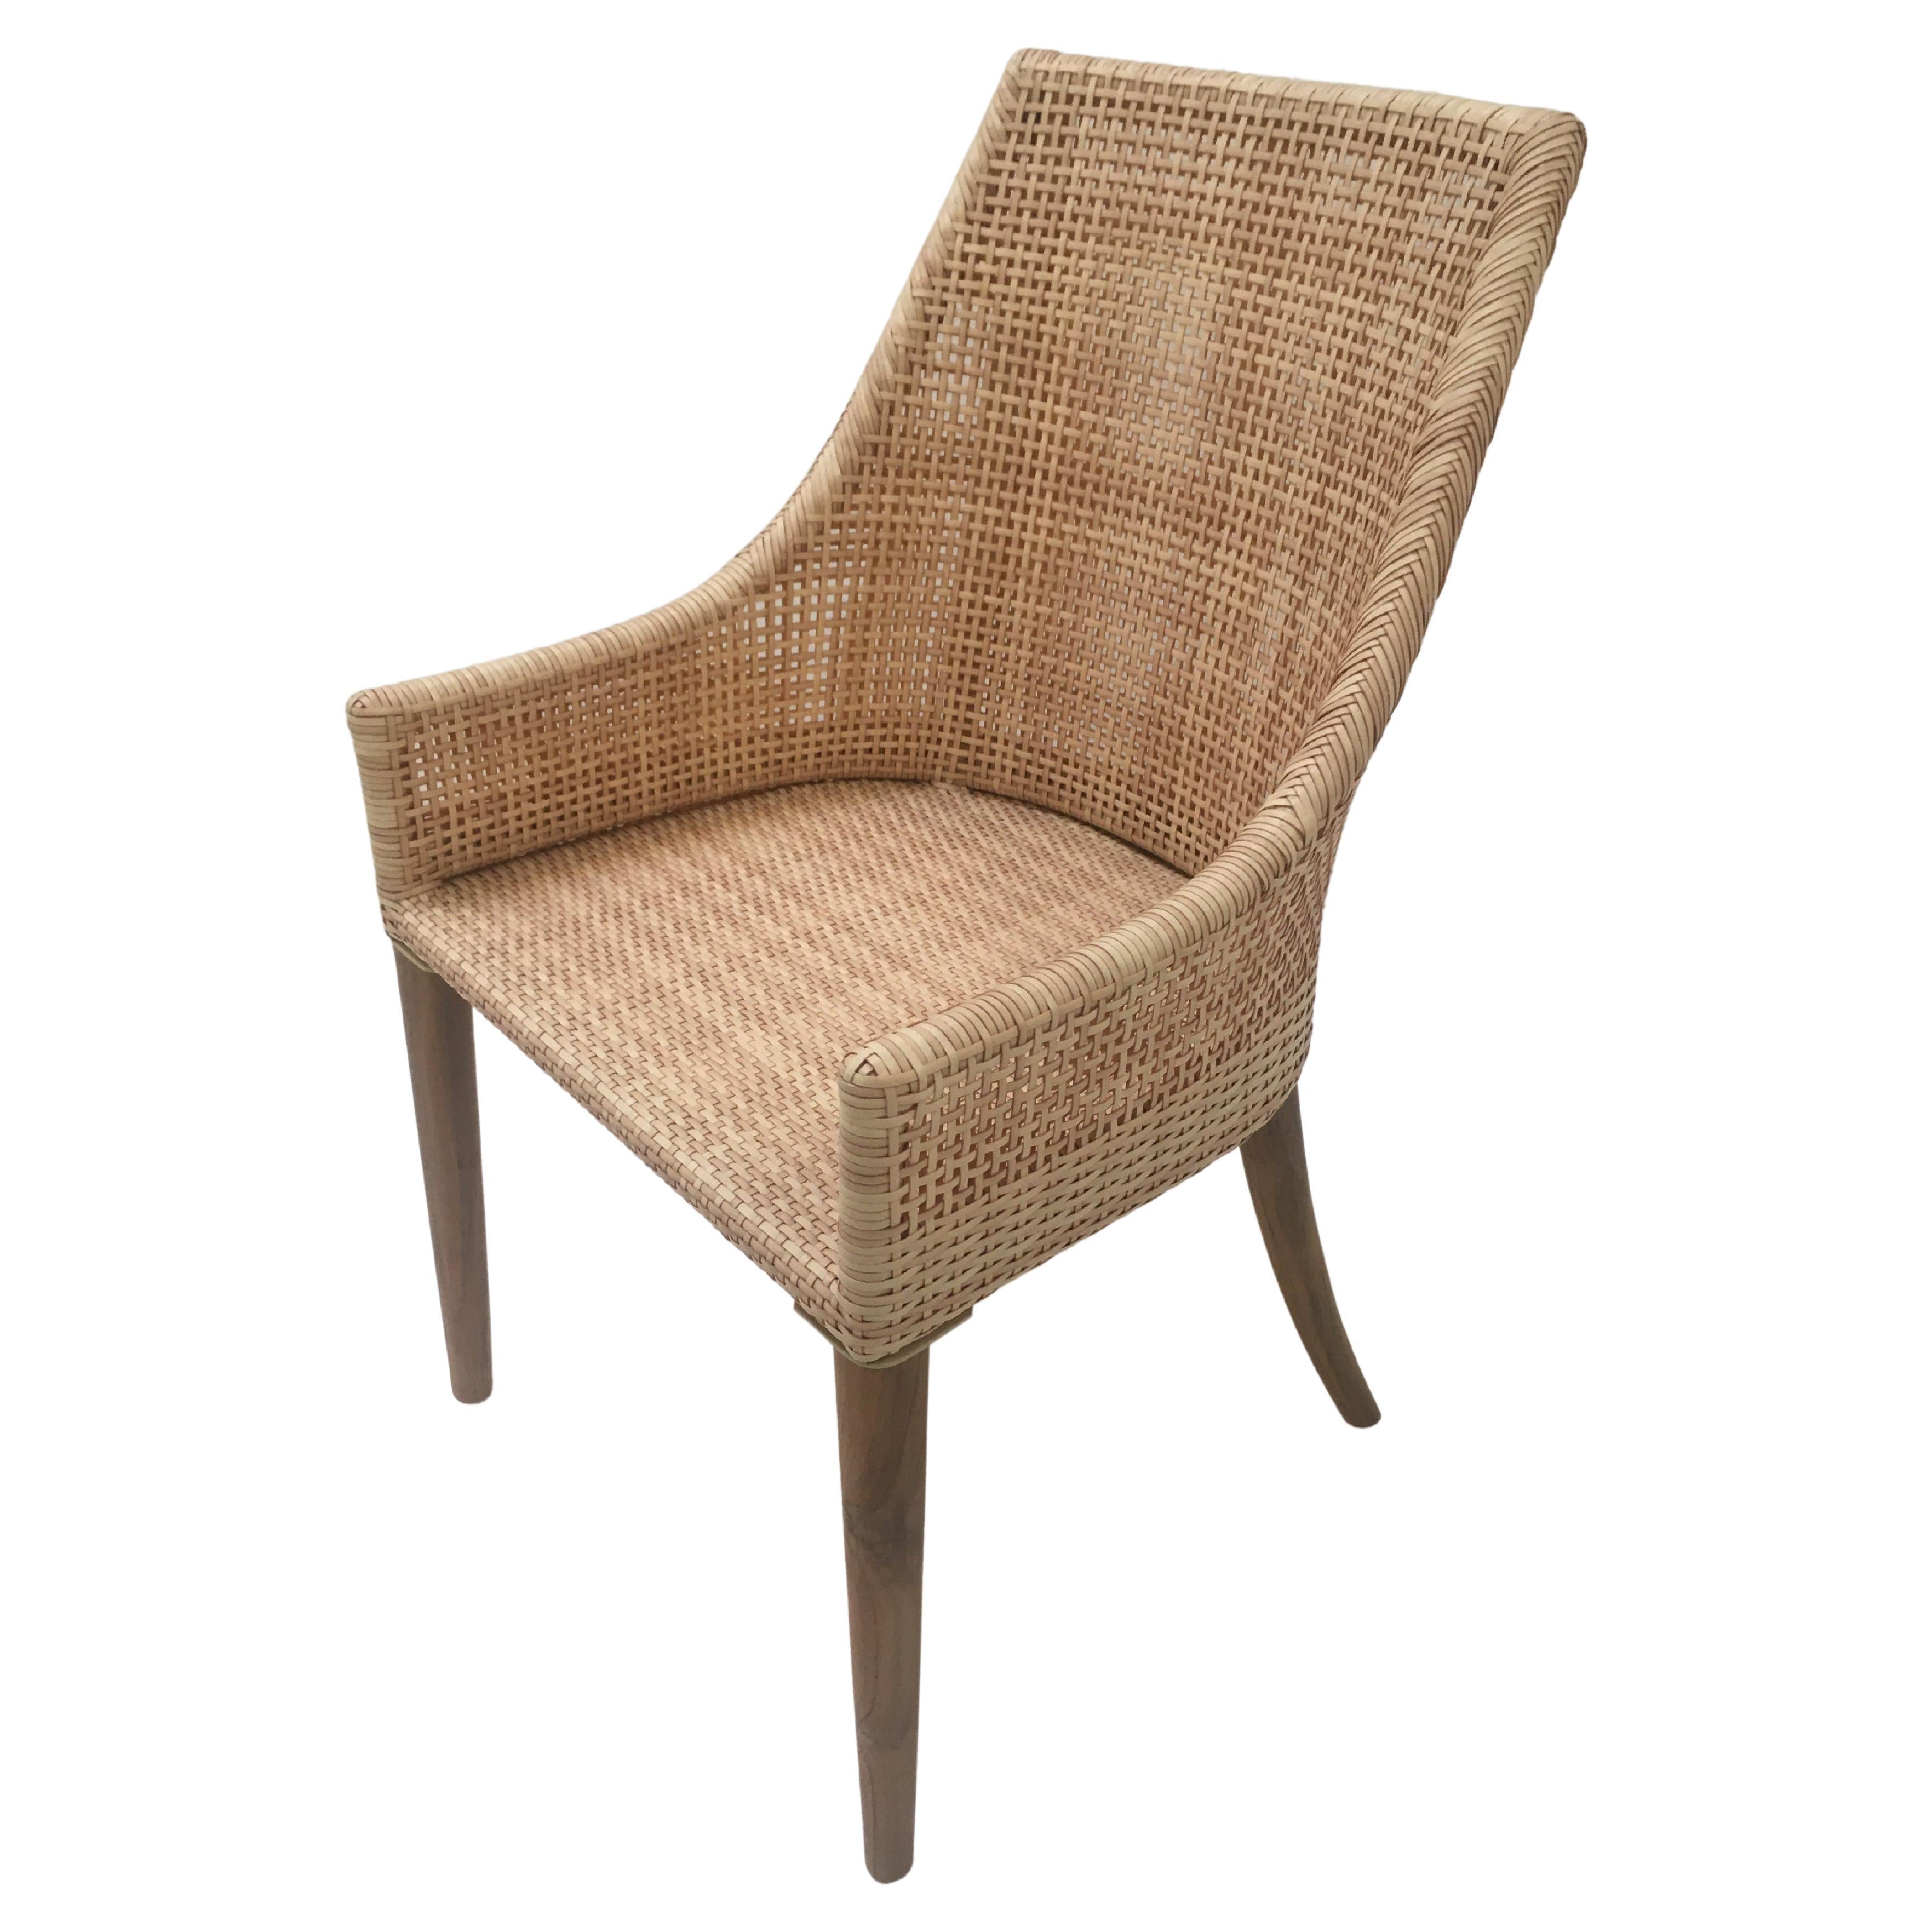 Handcrafted Braided Resin Rattan Effect and Teak Wooden Outdoor Chair